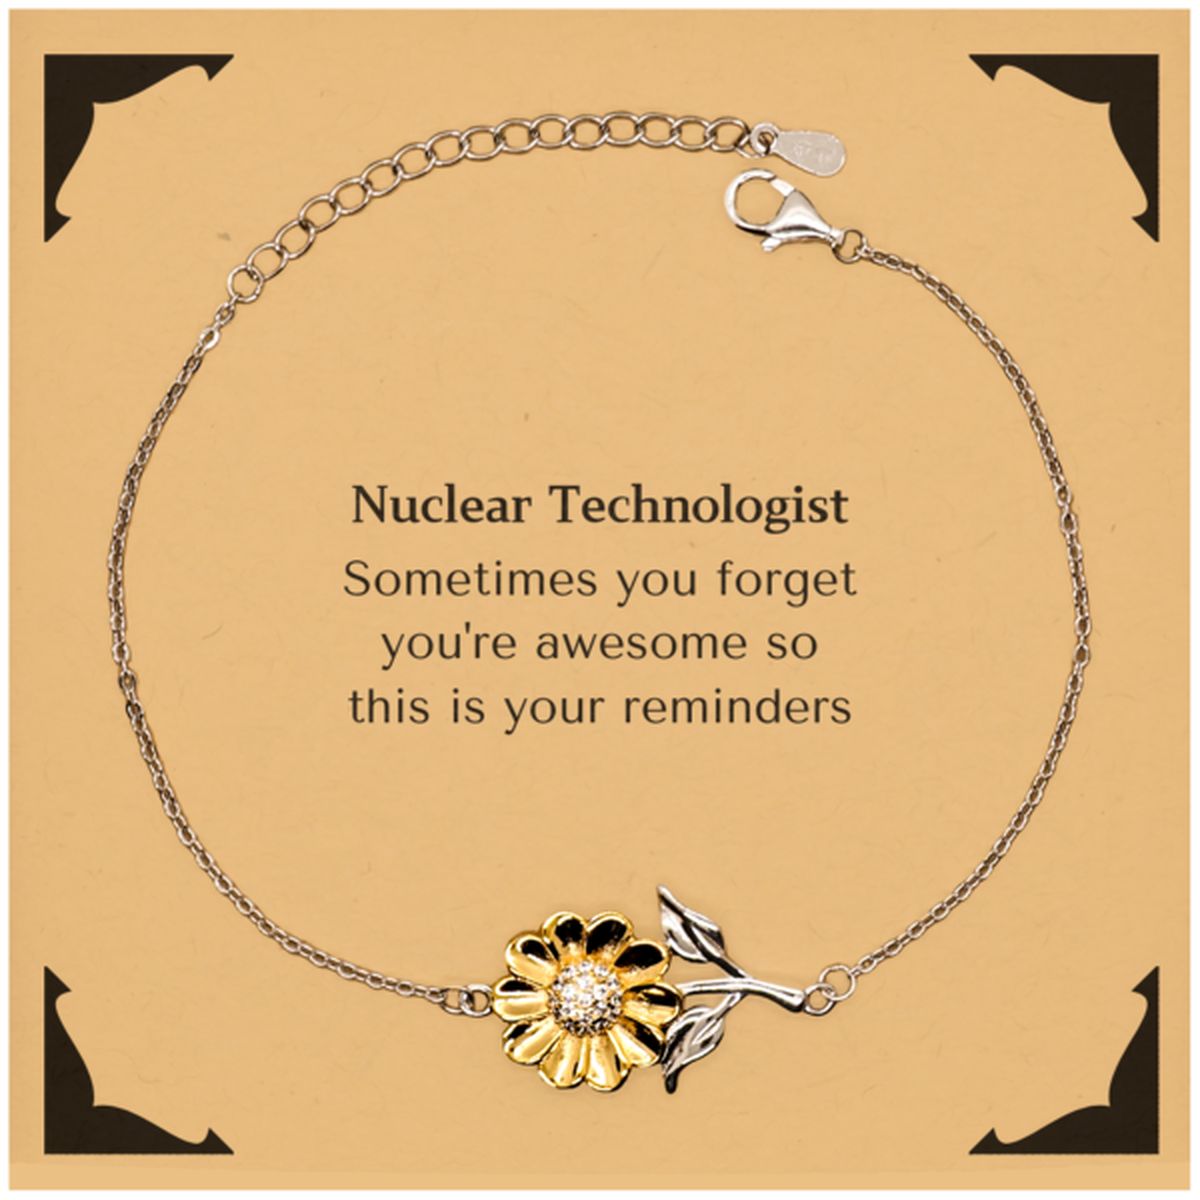 Sentimental Nuclear Technologist Sunflower Bracelet, Nuclear Technologist Sometimes you forget you're awesome so this is your reminders, Graduation Christmas Birthday Gifts for Nuclear Technologist, Men, Women, Coworkers